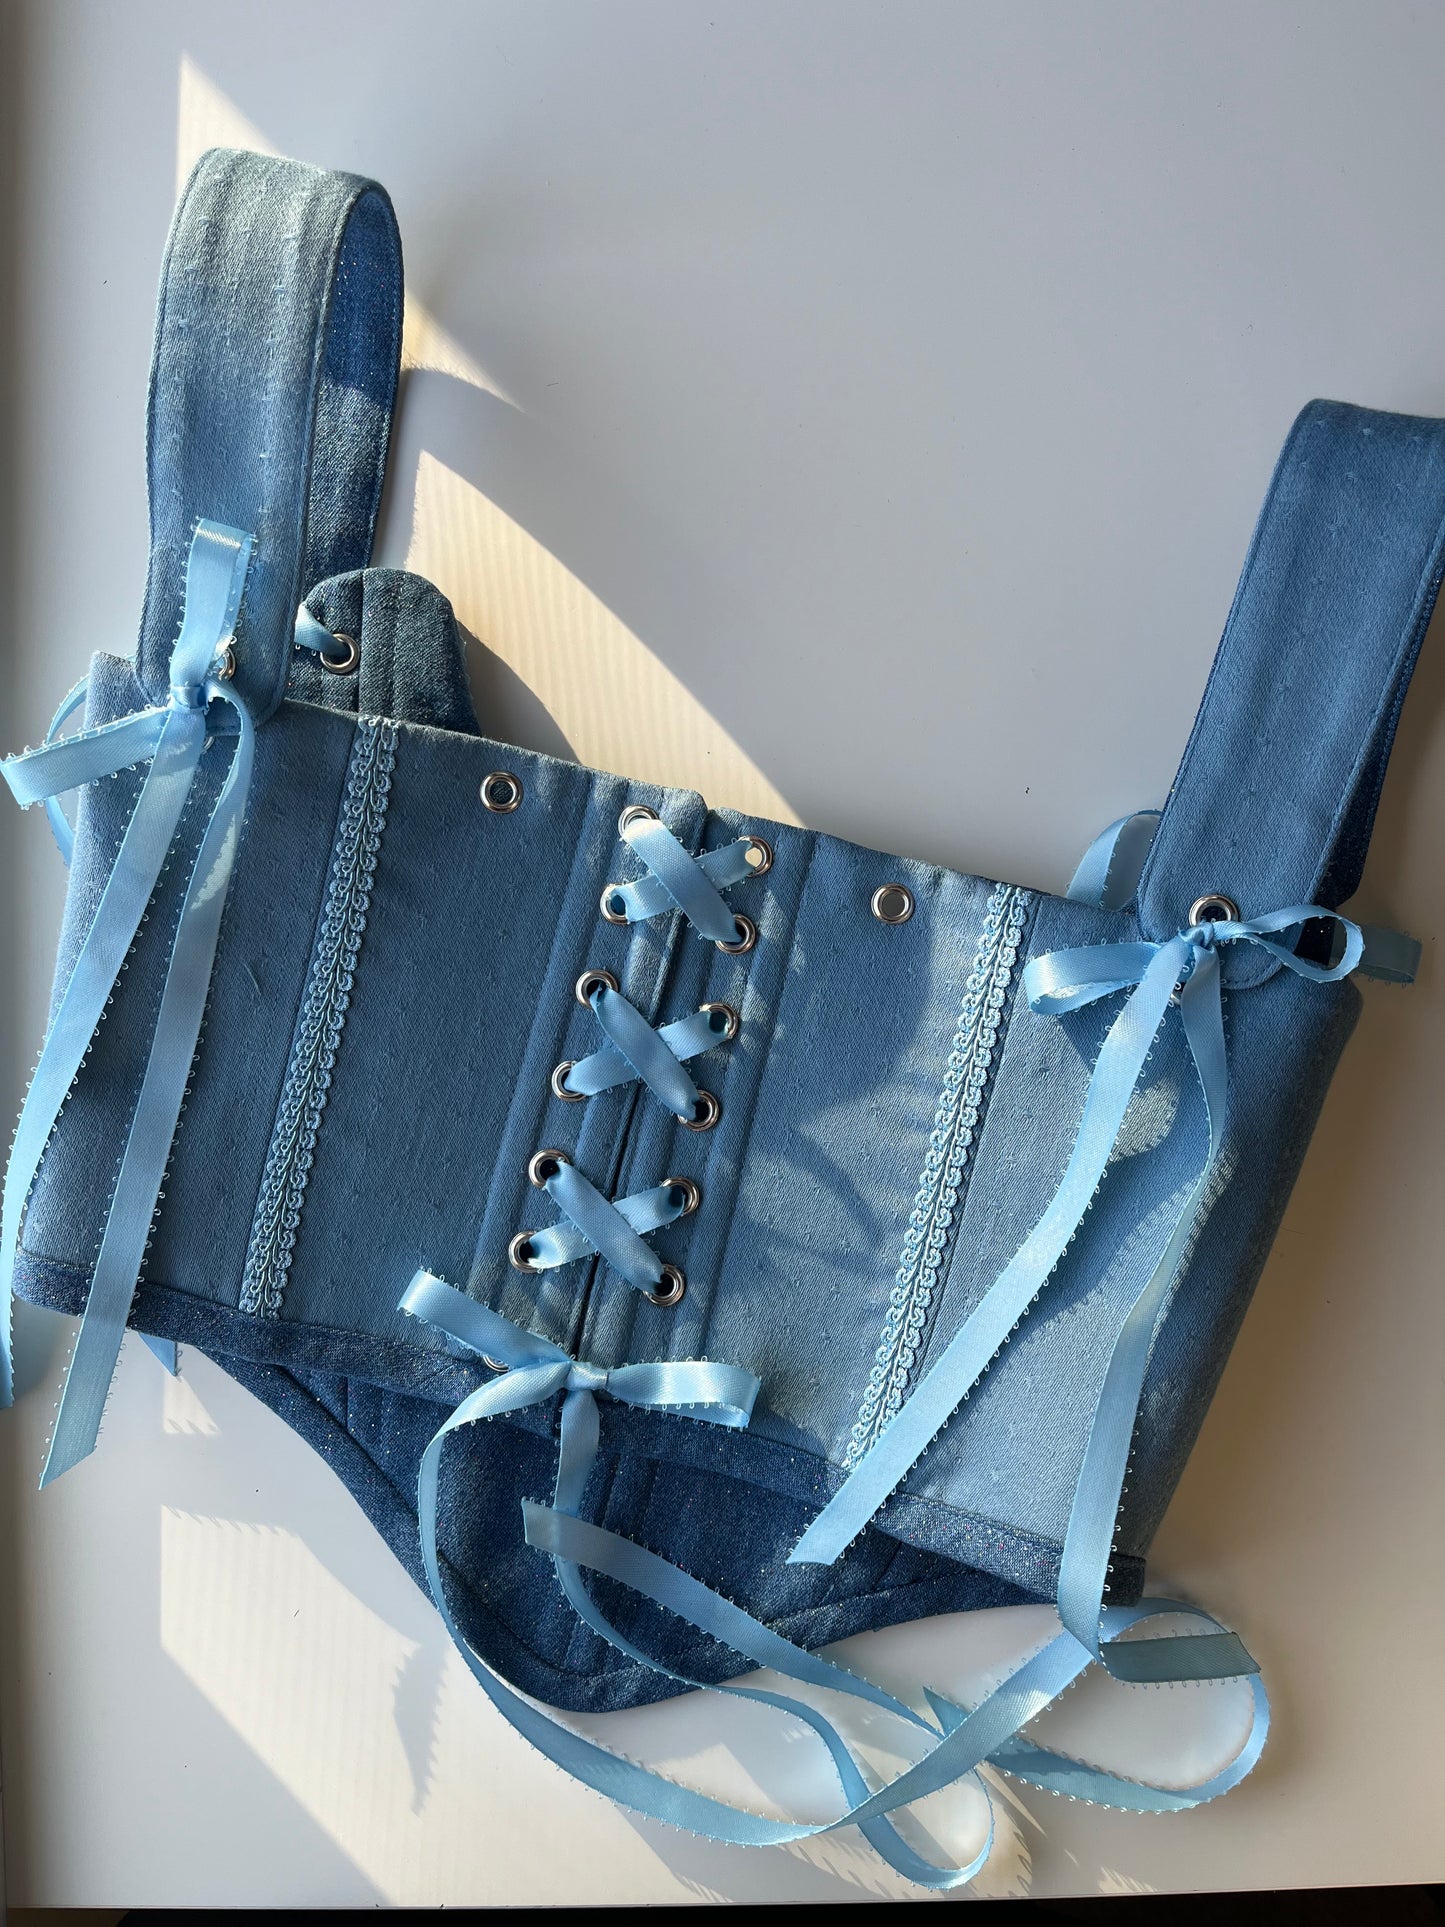 Size S Reversible corset in sparkly denim on one side and blue with trim on the other 🩵